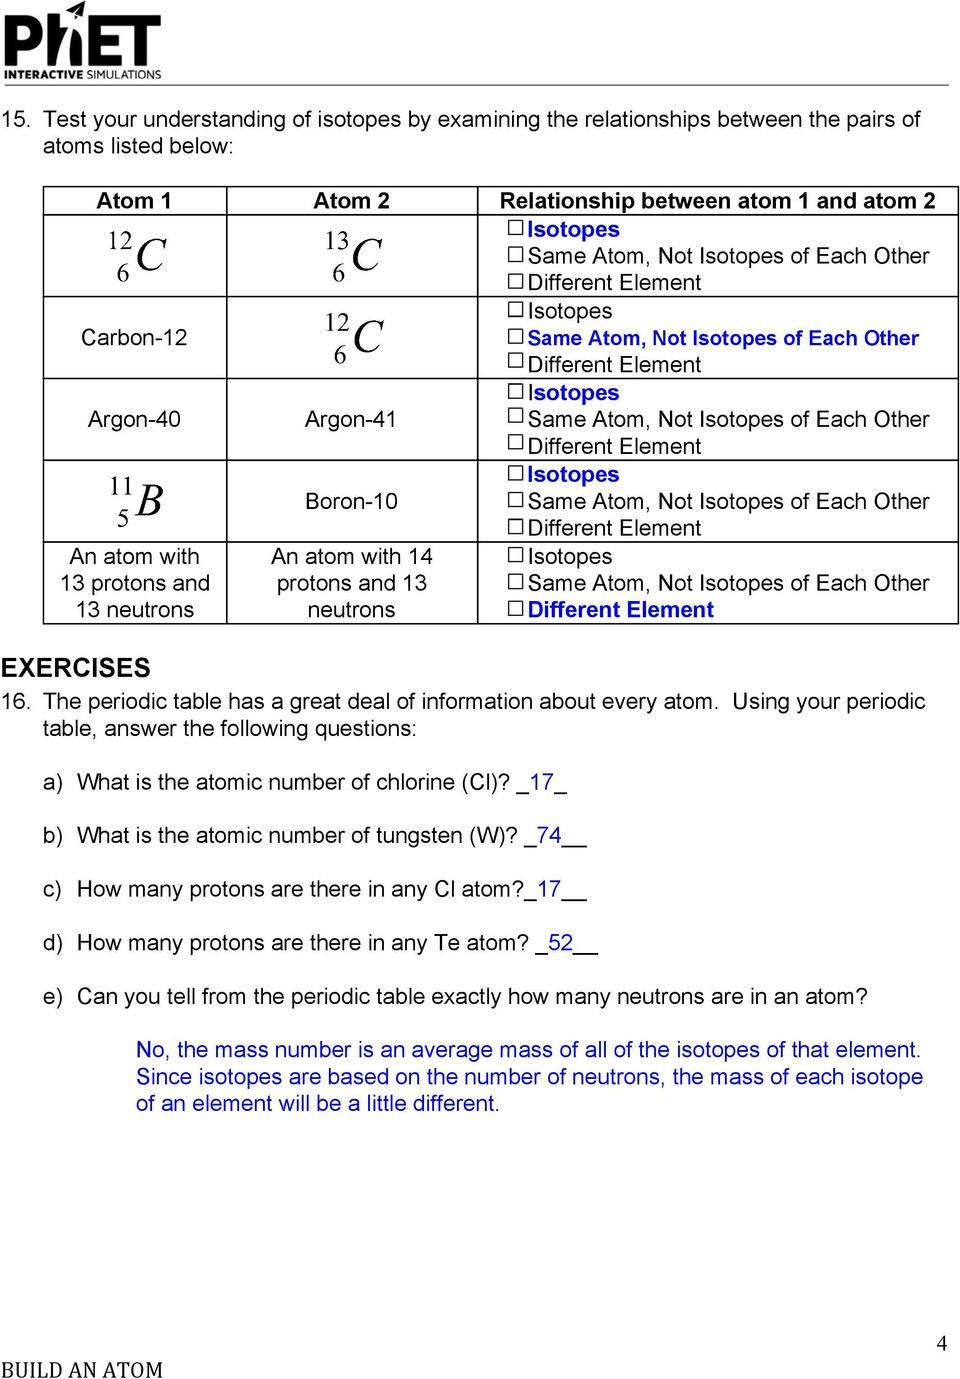 phet-isotopes-and-atomic-mass-worksheet-answer-key-db-excel